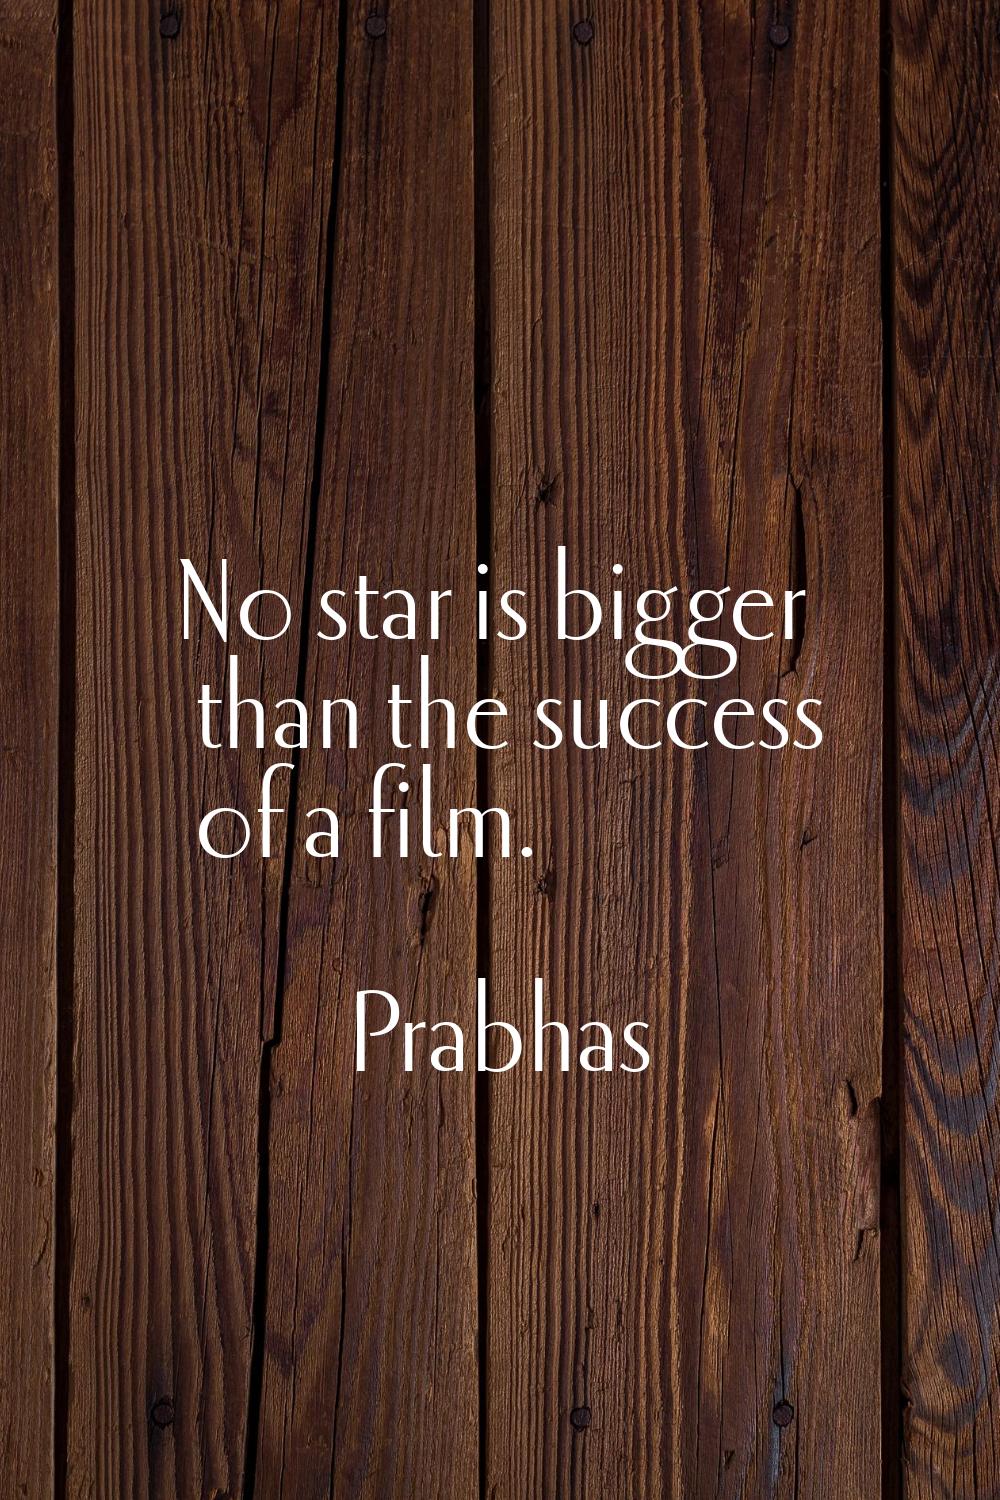 No star is bigger than the success of a film.